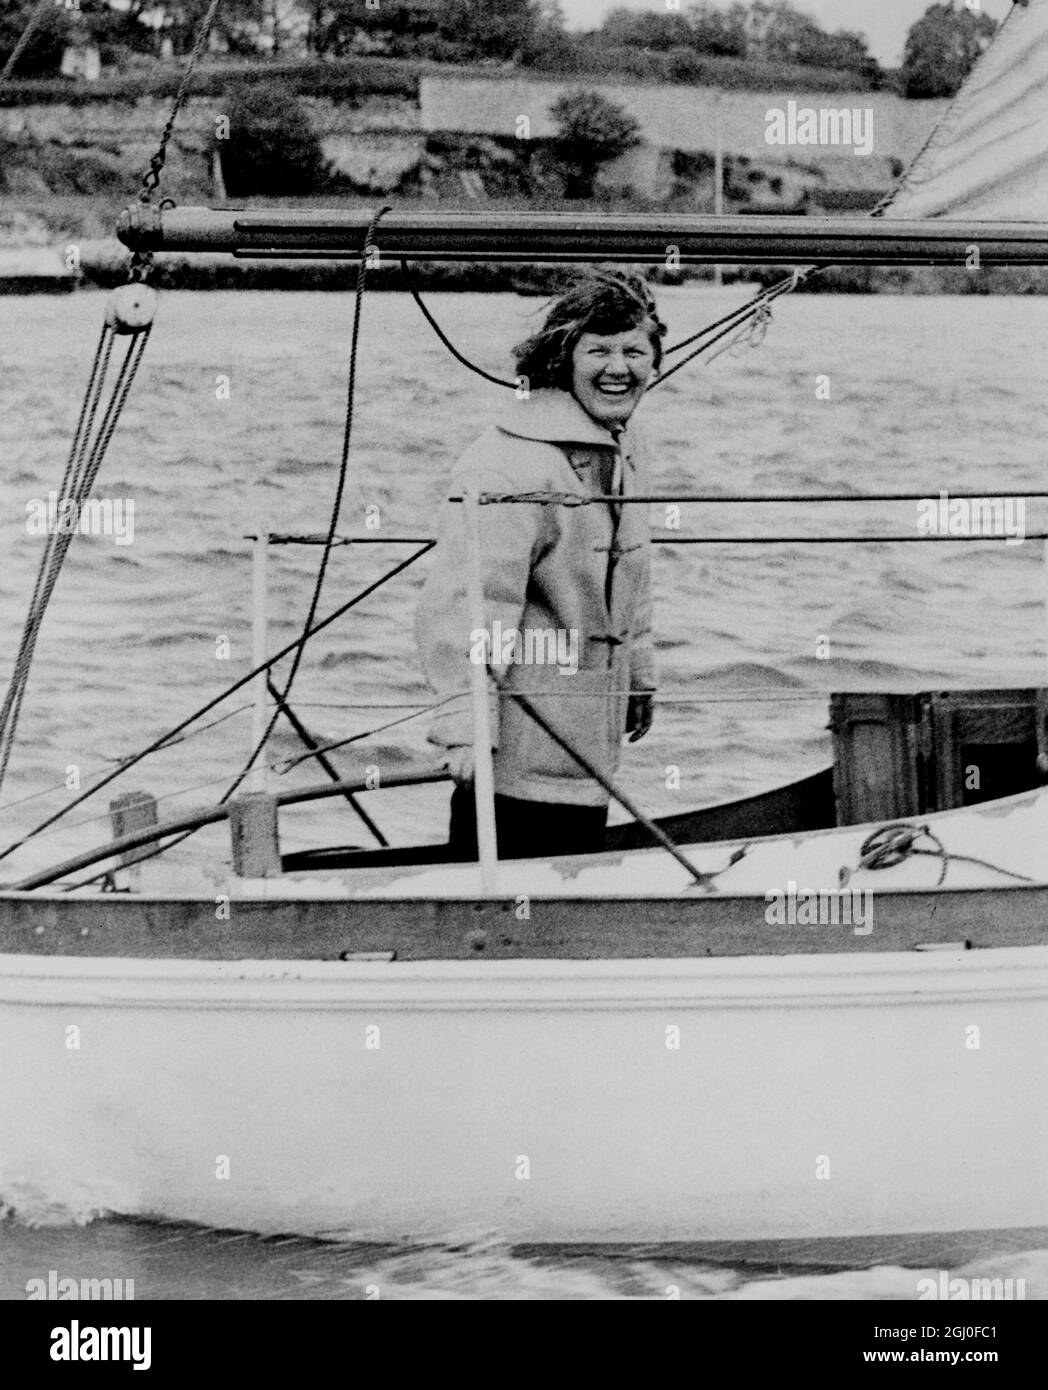 Woman to sail the Atlantic alone... 11th May 1952. The fantastically daring plan of 38 year old Ann Davison to be the first woman to sail the Atlantic single-handed in 'the sort of boat you could pull over your head and wear' - is the adventure story of the year. Today as she prepared to head for the high seas, messages of good will, encouragement and many warning her of the peril ahead pored in from all over the country. Many of the letters and telegrams were from other women who wish to share Ann's voyage. In slacks, jersey and duffle coat she went on a last minute shopping tour in Plymouth. Stock Photo